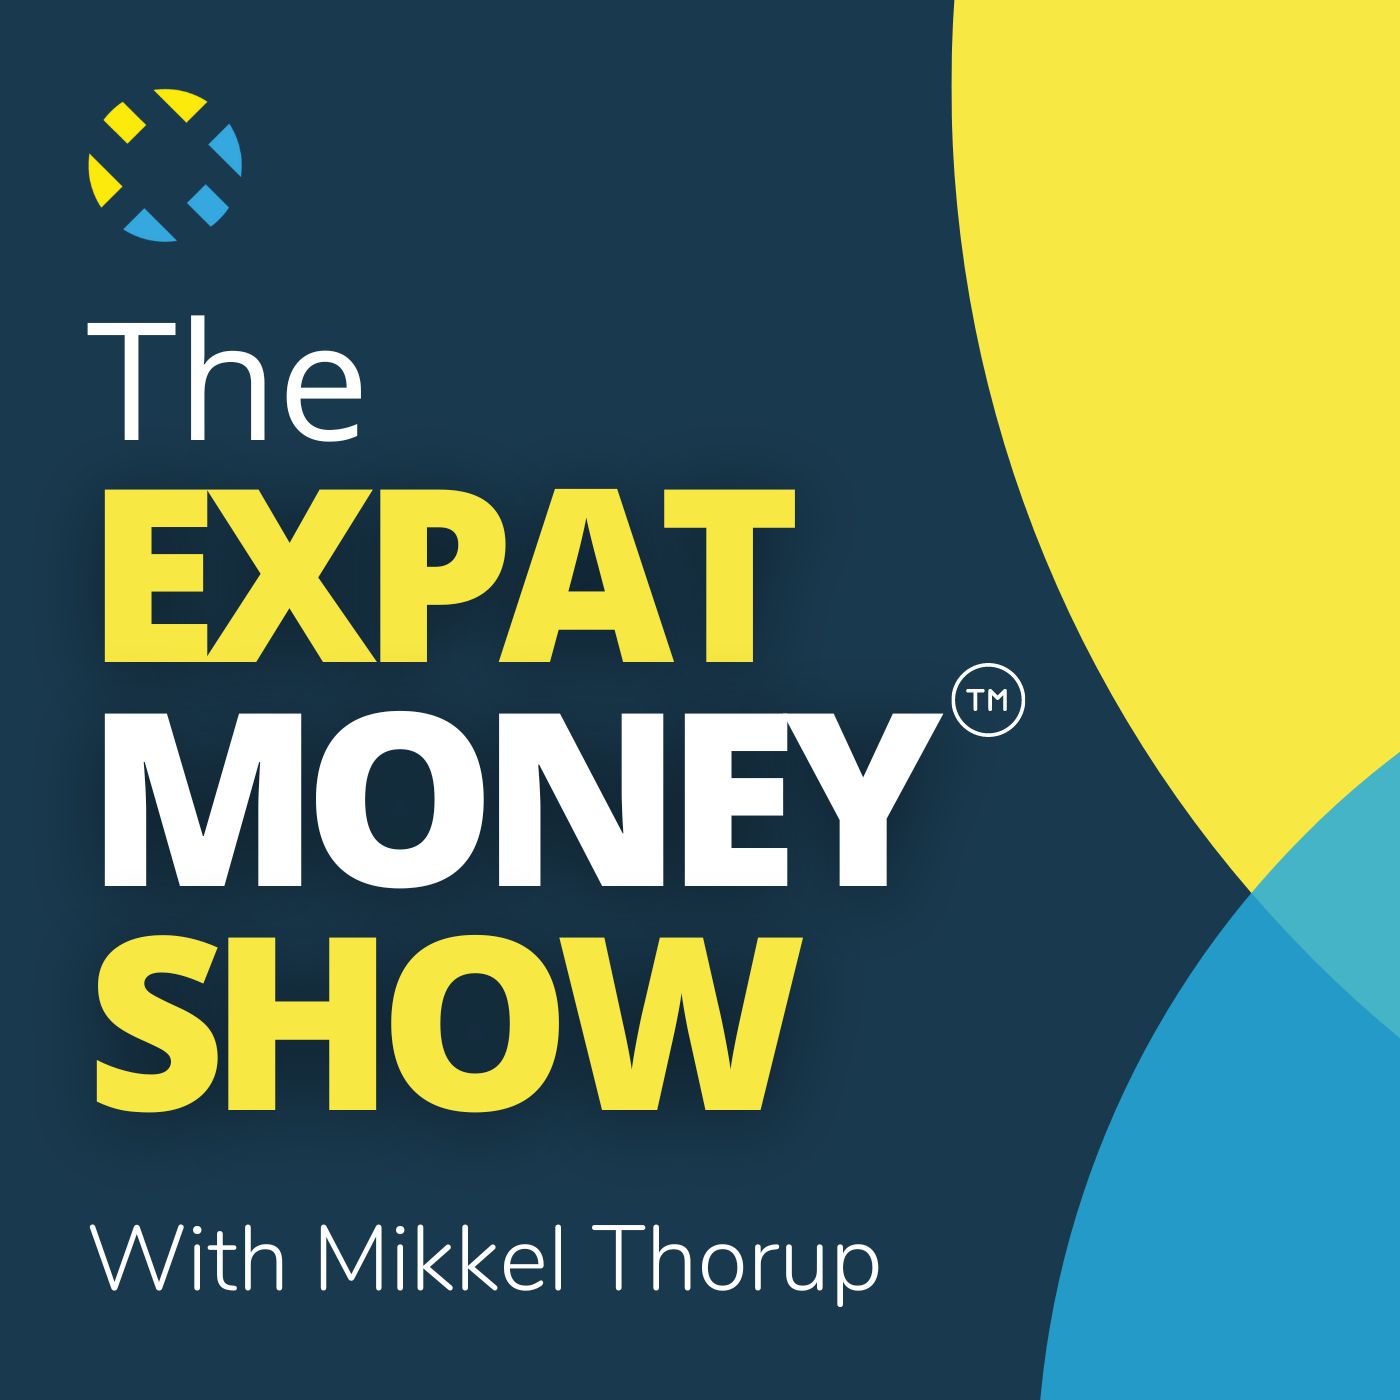 Artwork for podcast The Expat Money Show - With Mikkel Thorup